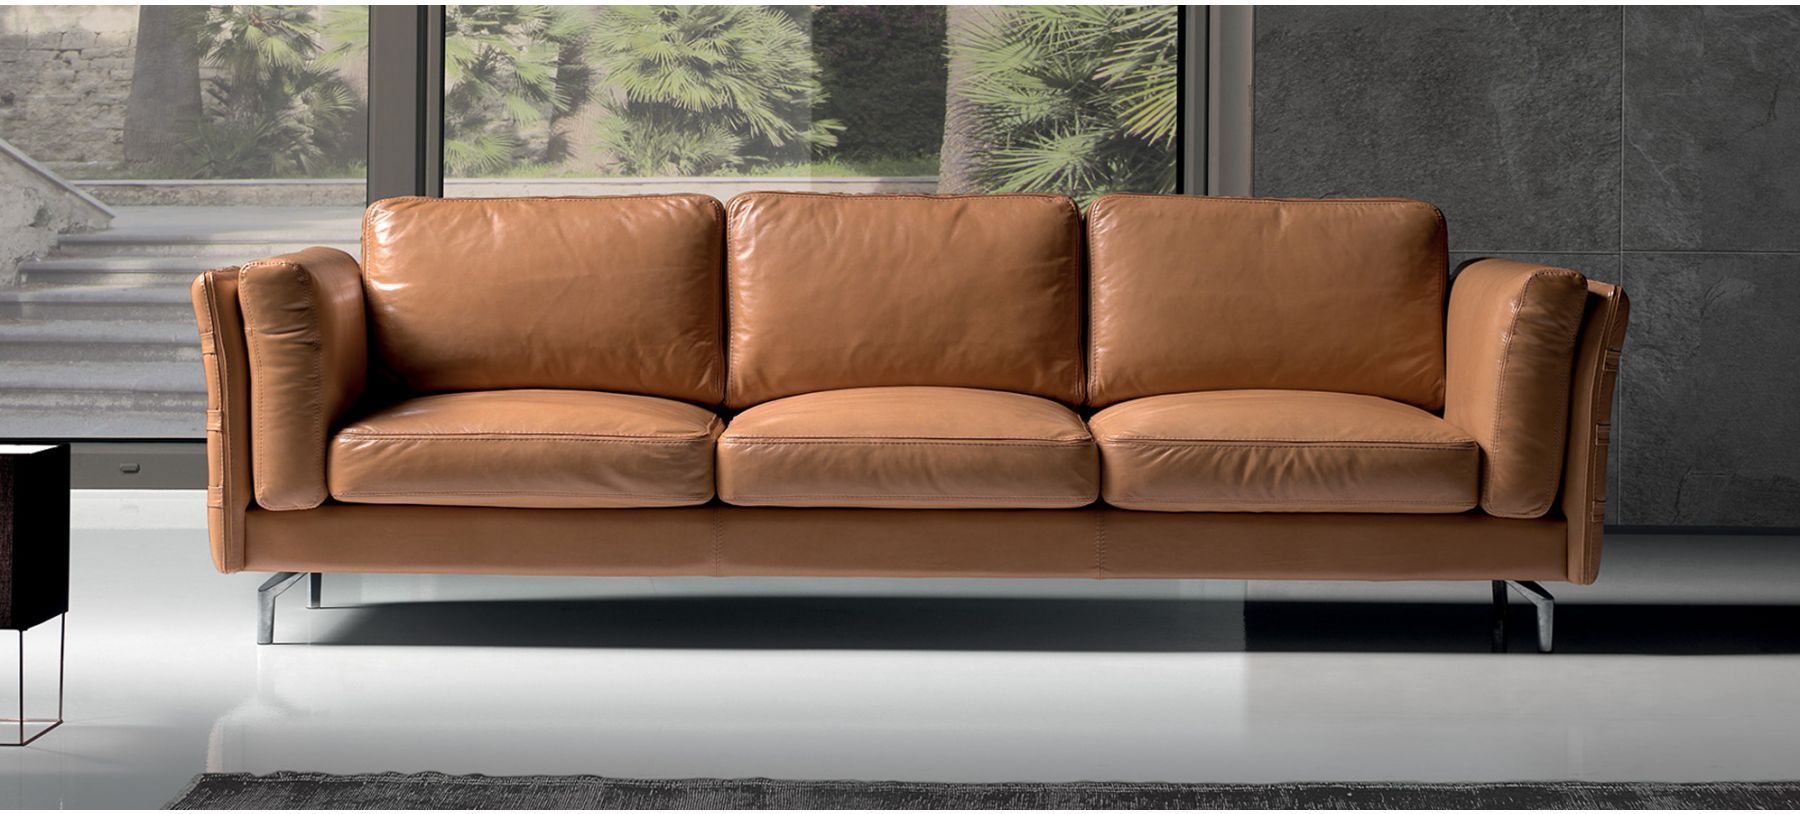 Jenny Leather Tan 3 + 2 Sofa Set With Chrome Legs Newtrend Available In A  Range Of Leathers And Colours 10 Yr Frame 10 Yr Pocket Sprung 5 Yr Foam  Warranty | Leather Sofa World Within Chrome Metal Legs Sofas (View 6 of 15)